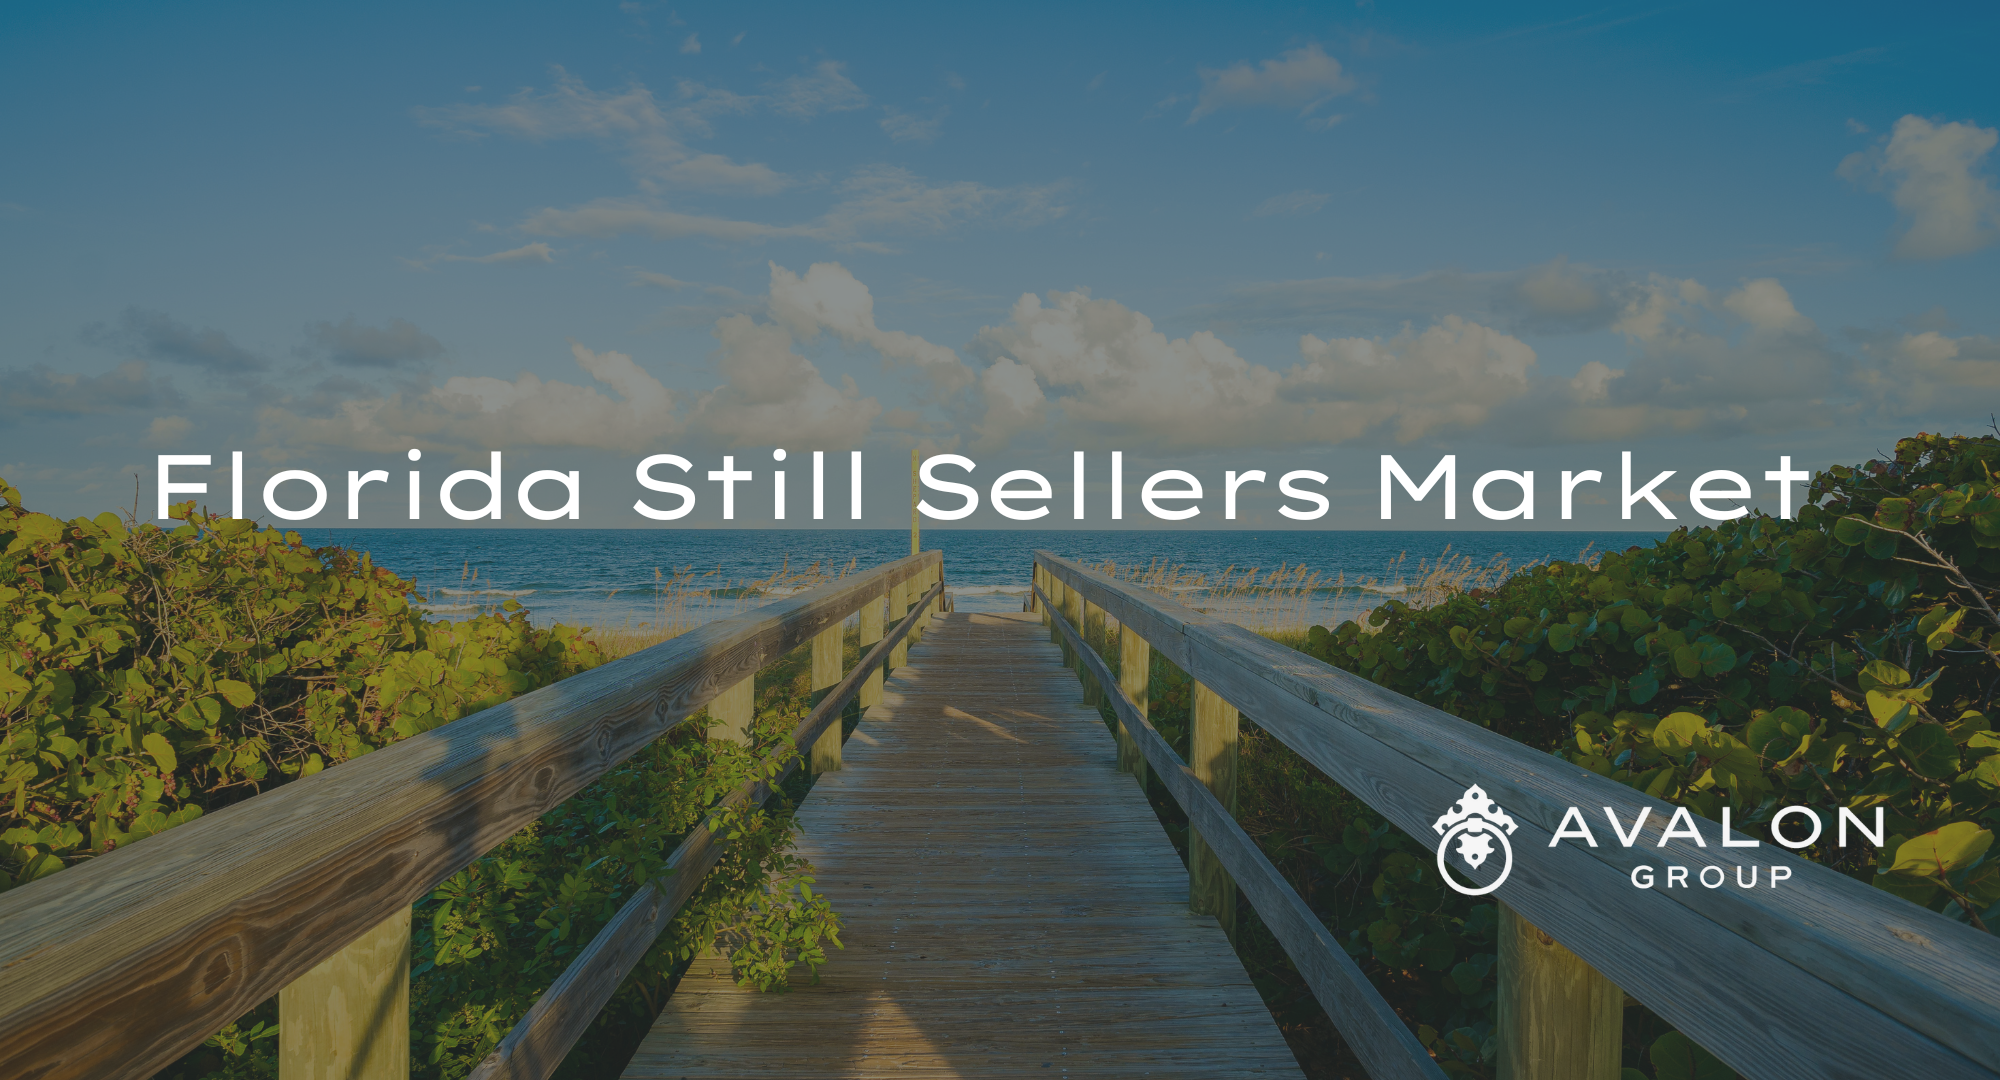 Florida Still Sellers Market is the title on this picture and the background is a beach picture.